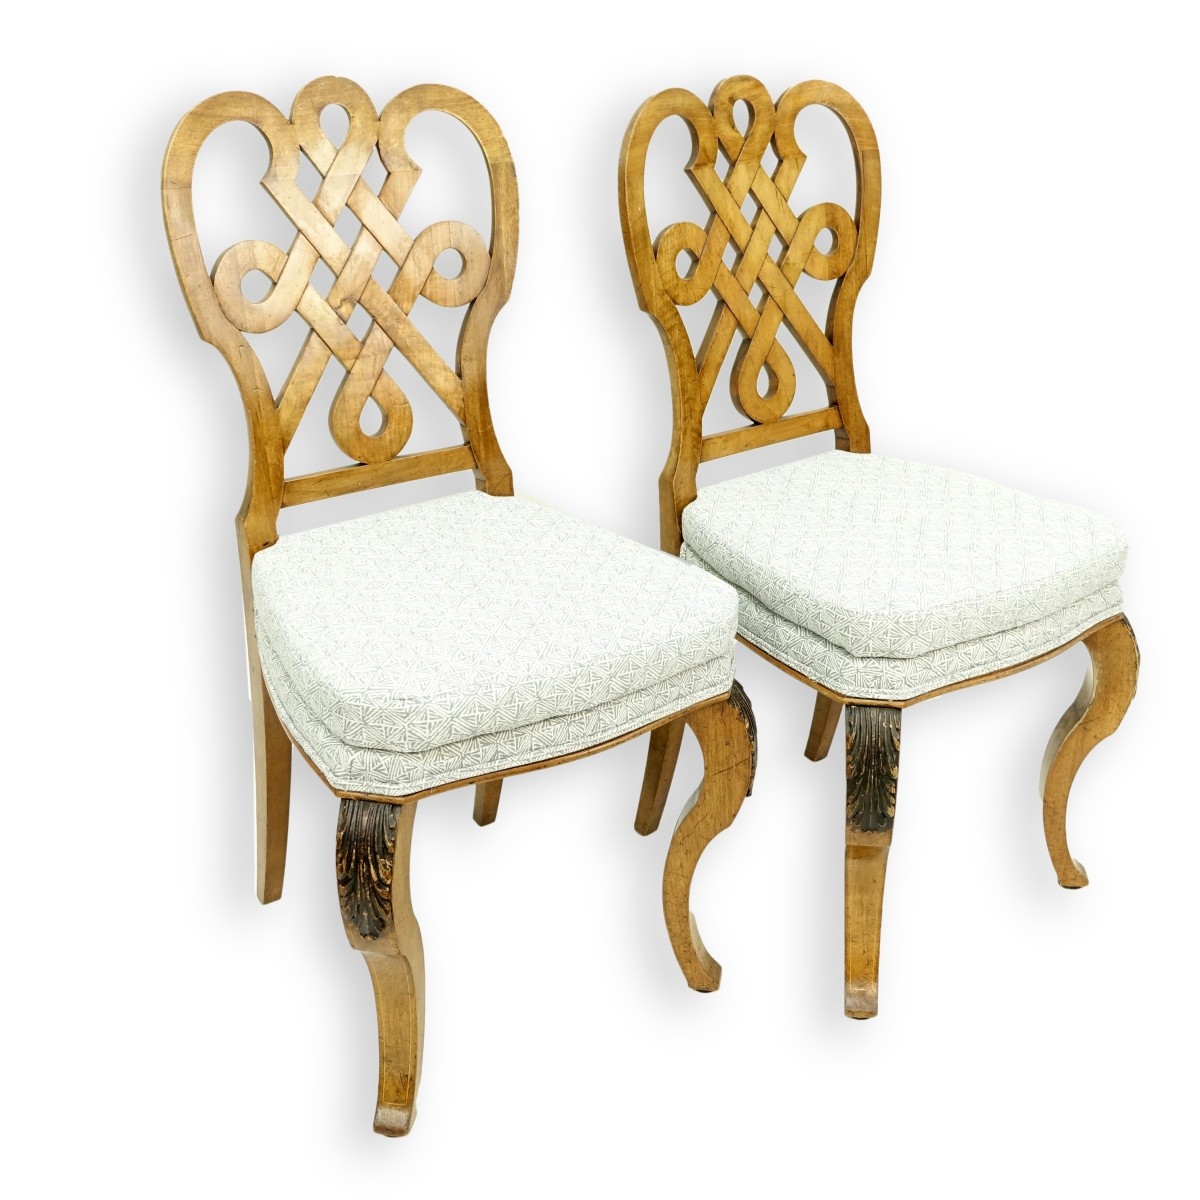 Pair of Ribbon Chairs